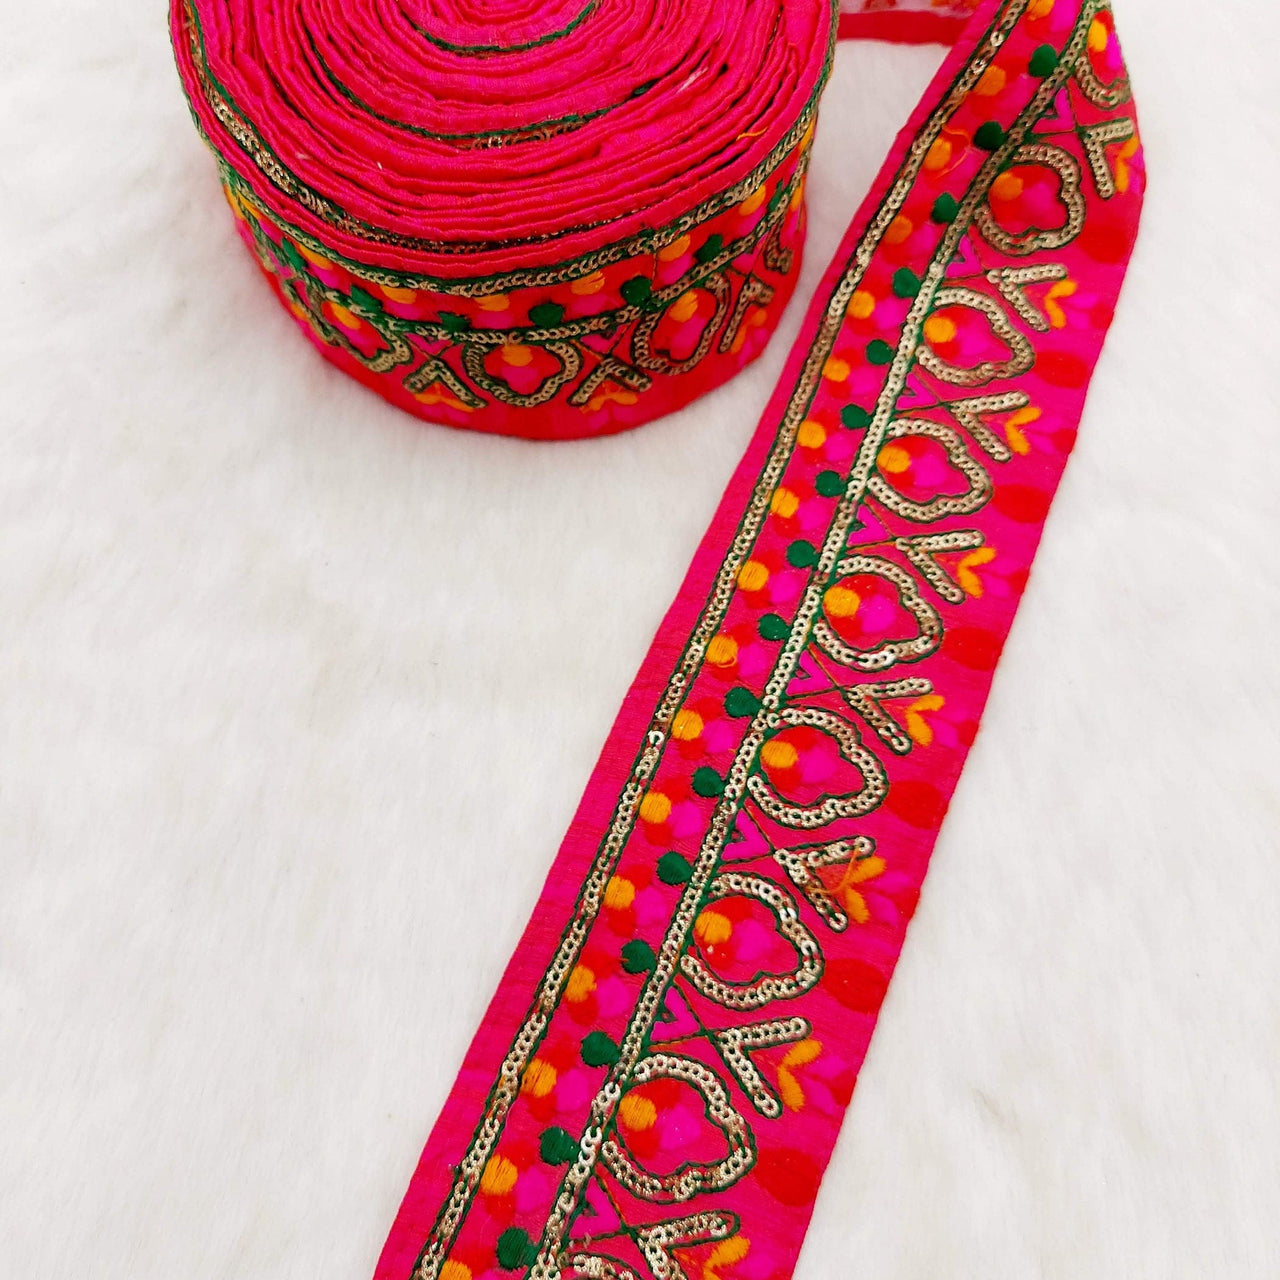 Deep Pink Fabric Trim With Green, Fuchsia Pink, Red And Orange Embroidery and Gold Sequins